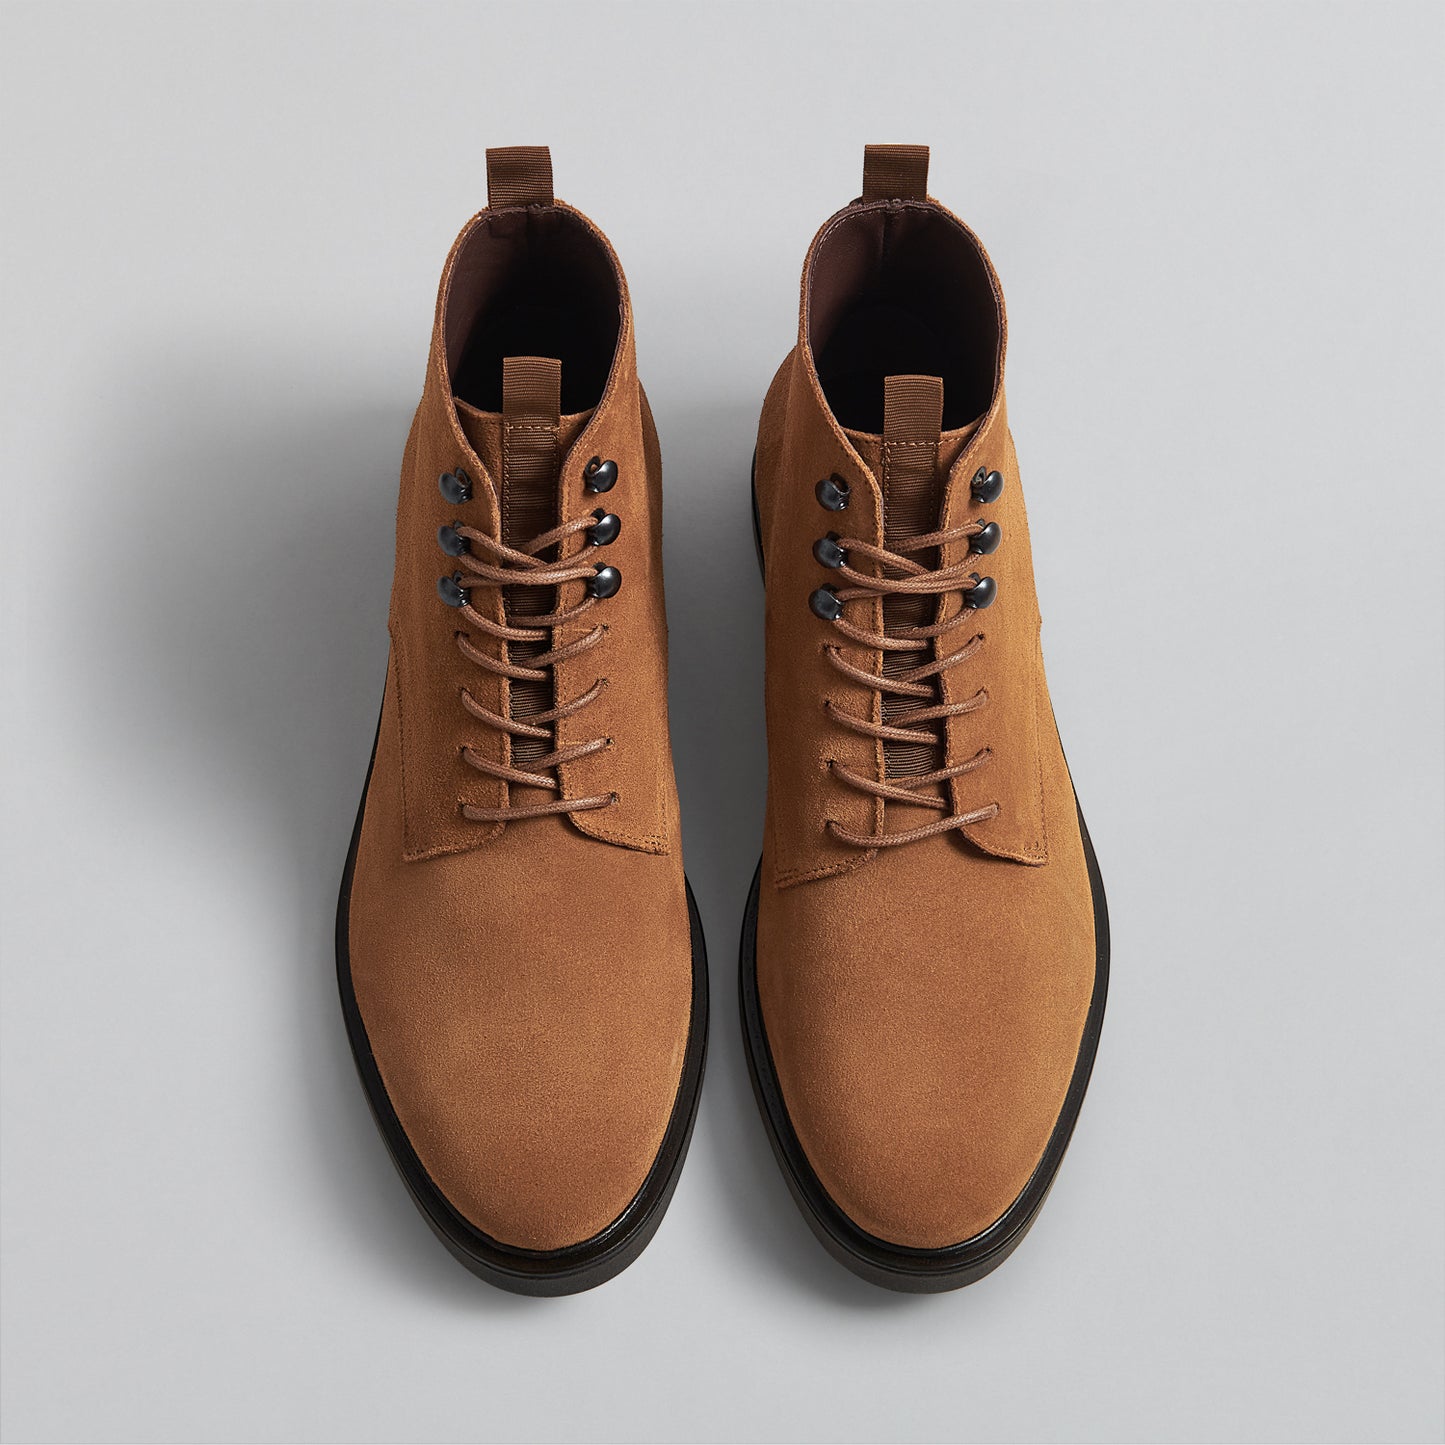 HOLBROOK TOBACCO SUEDE BOOT